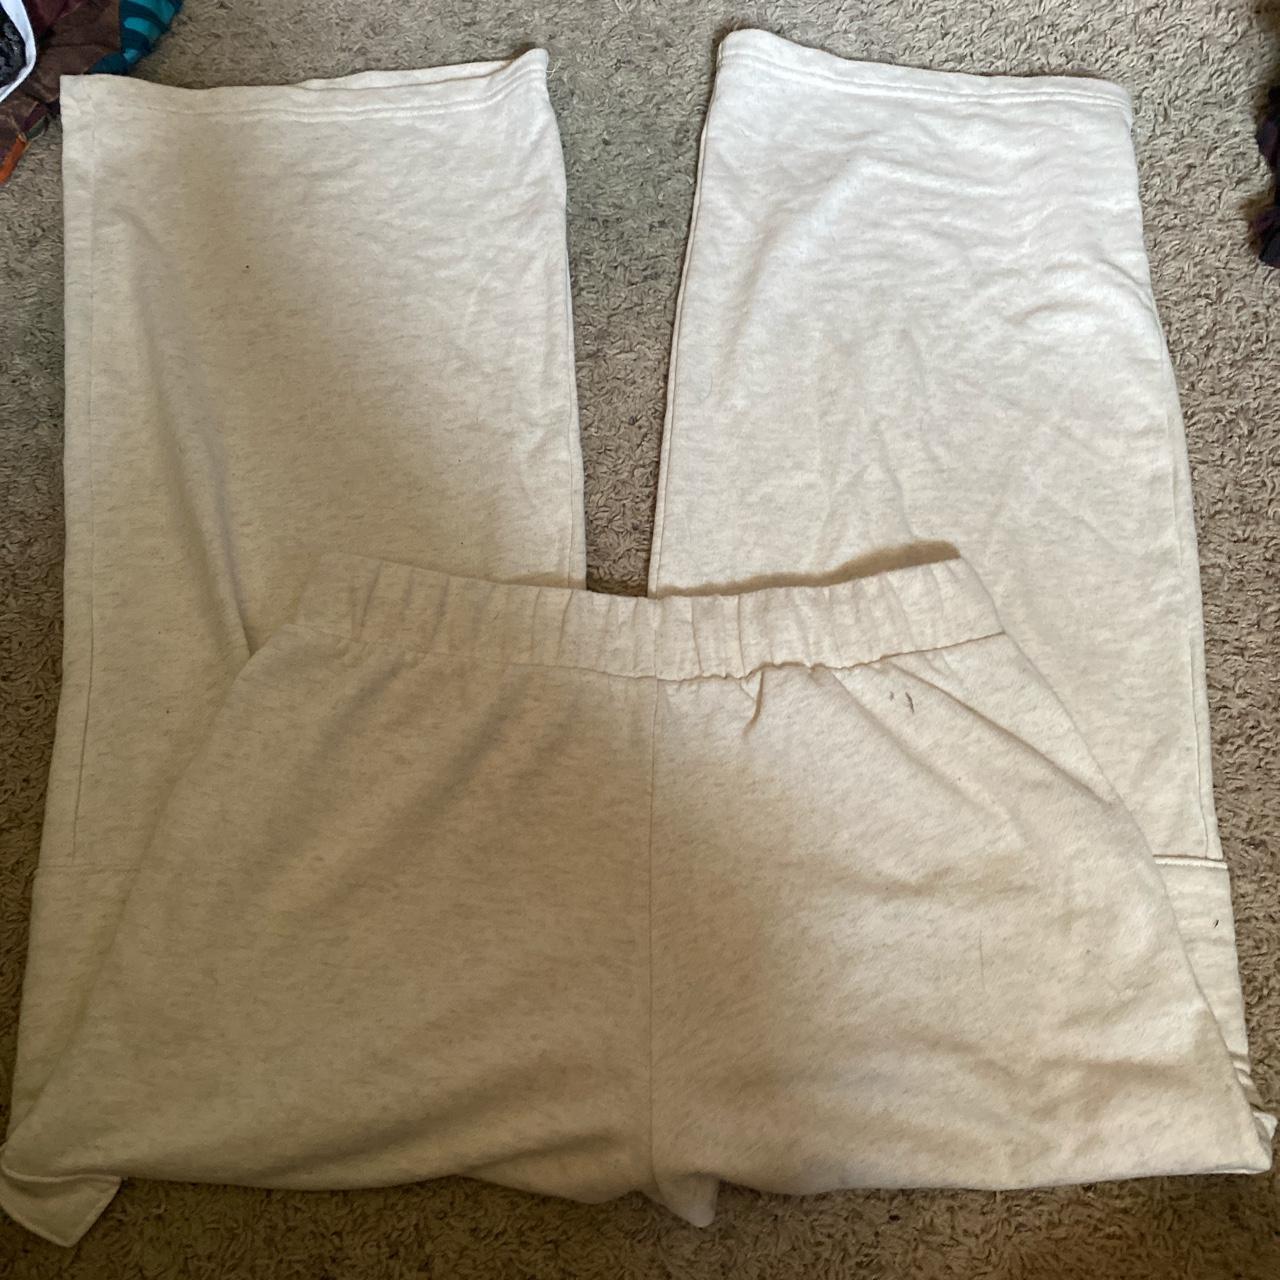 Target Women's White and Cream Joggers-tracksuits (3)